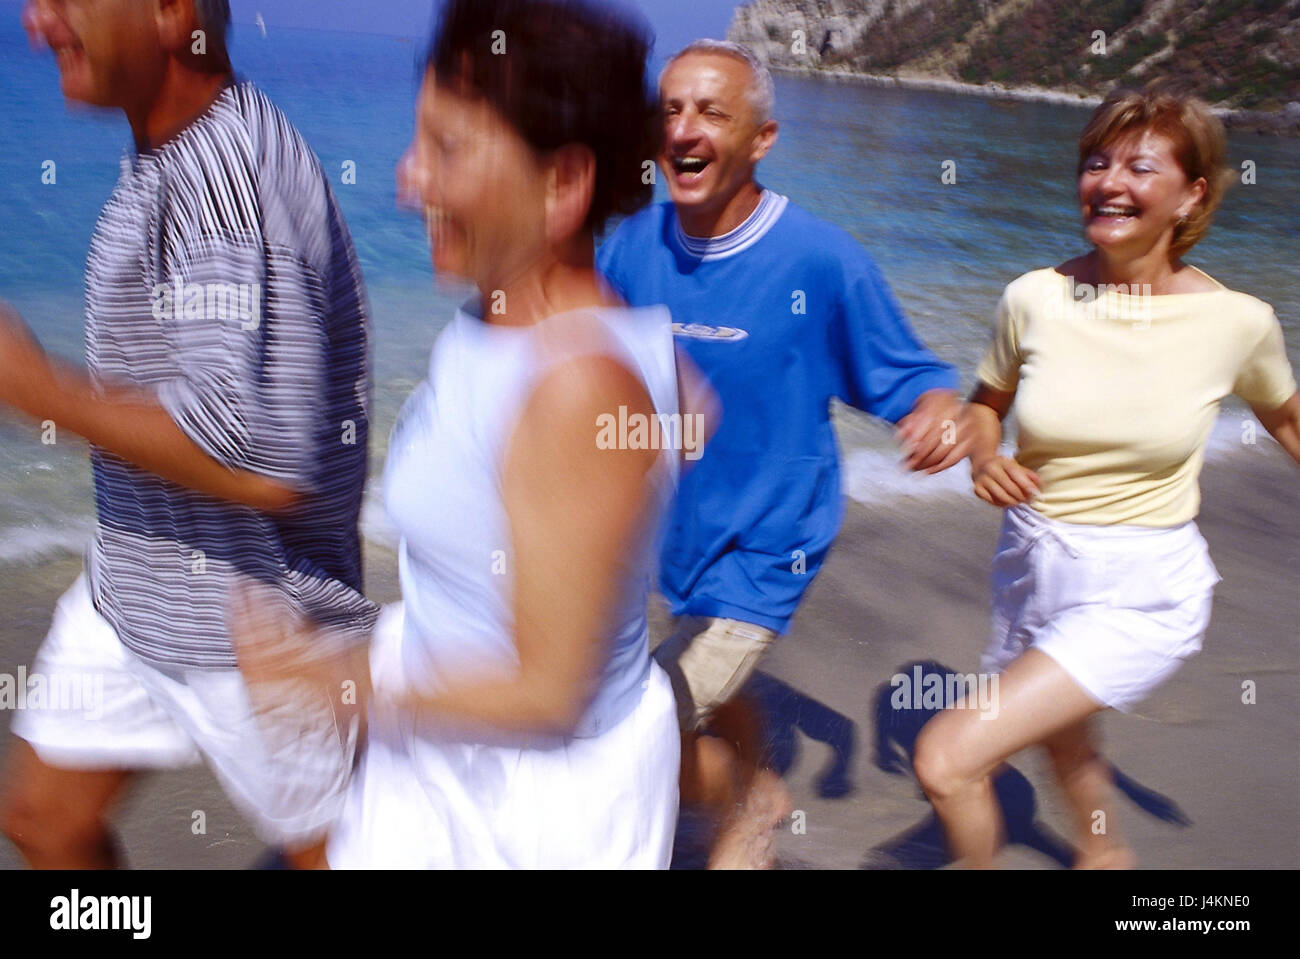 Couples, middle old person, beach run, half portrait, blur outside, summer, vacation, leisure time, lifestyle, four, friends, together, fun, happily, tuning, positively, sport, sportily, beach, sea, run, jog, jogging, fit fitness, agile, motion, activity, leisurewear Stock Photo